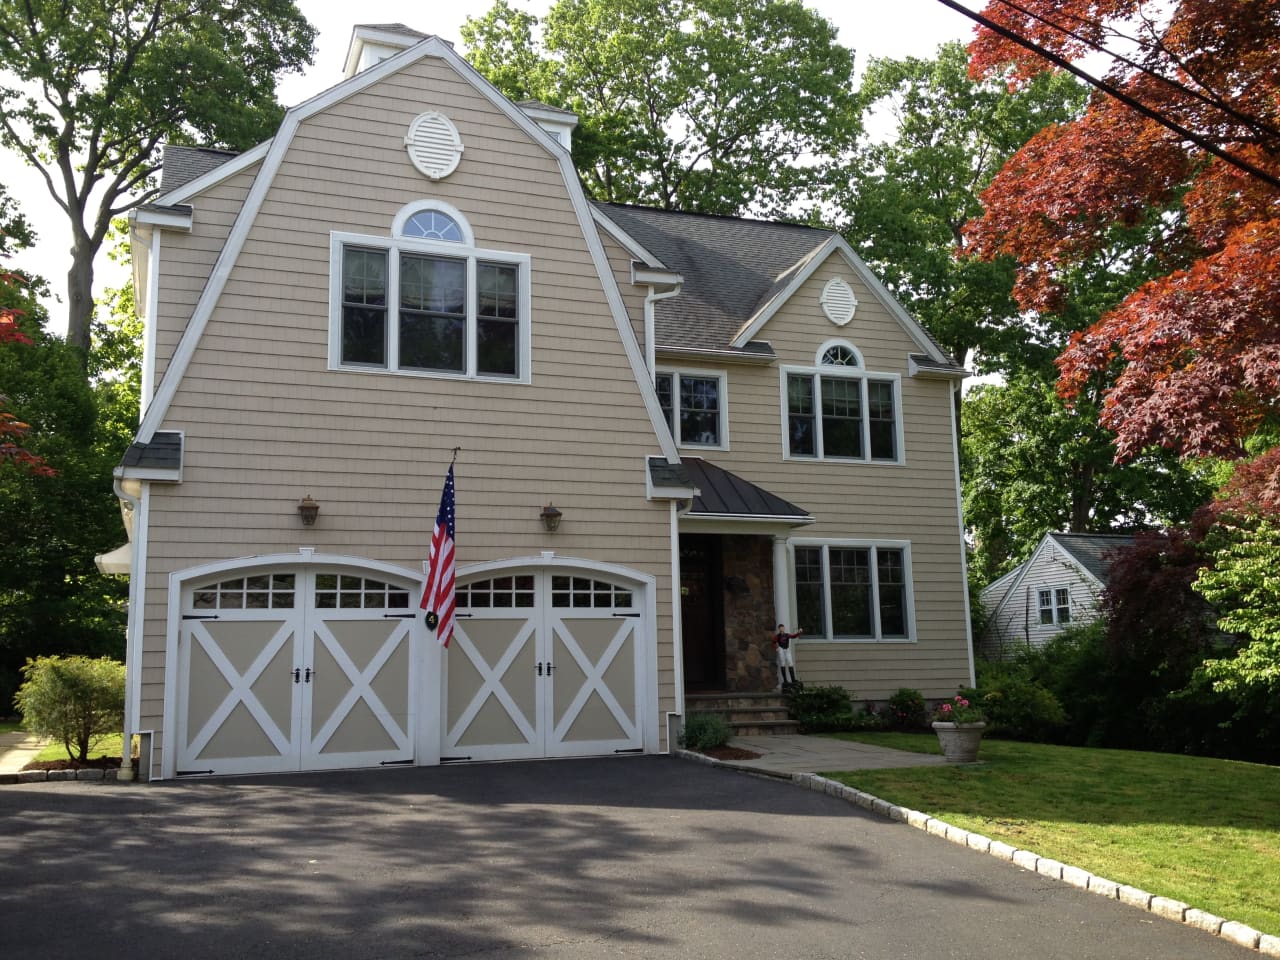 The home at 4 Leslie Lane in New Canaan will be open from 1 to 3 p.m. on Sunday. 